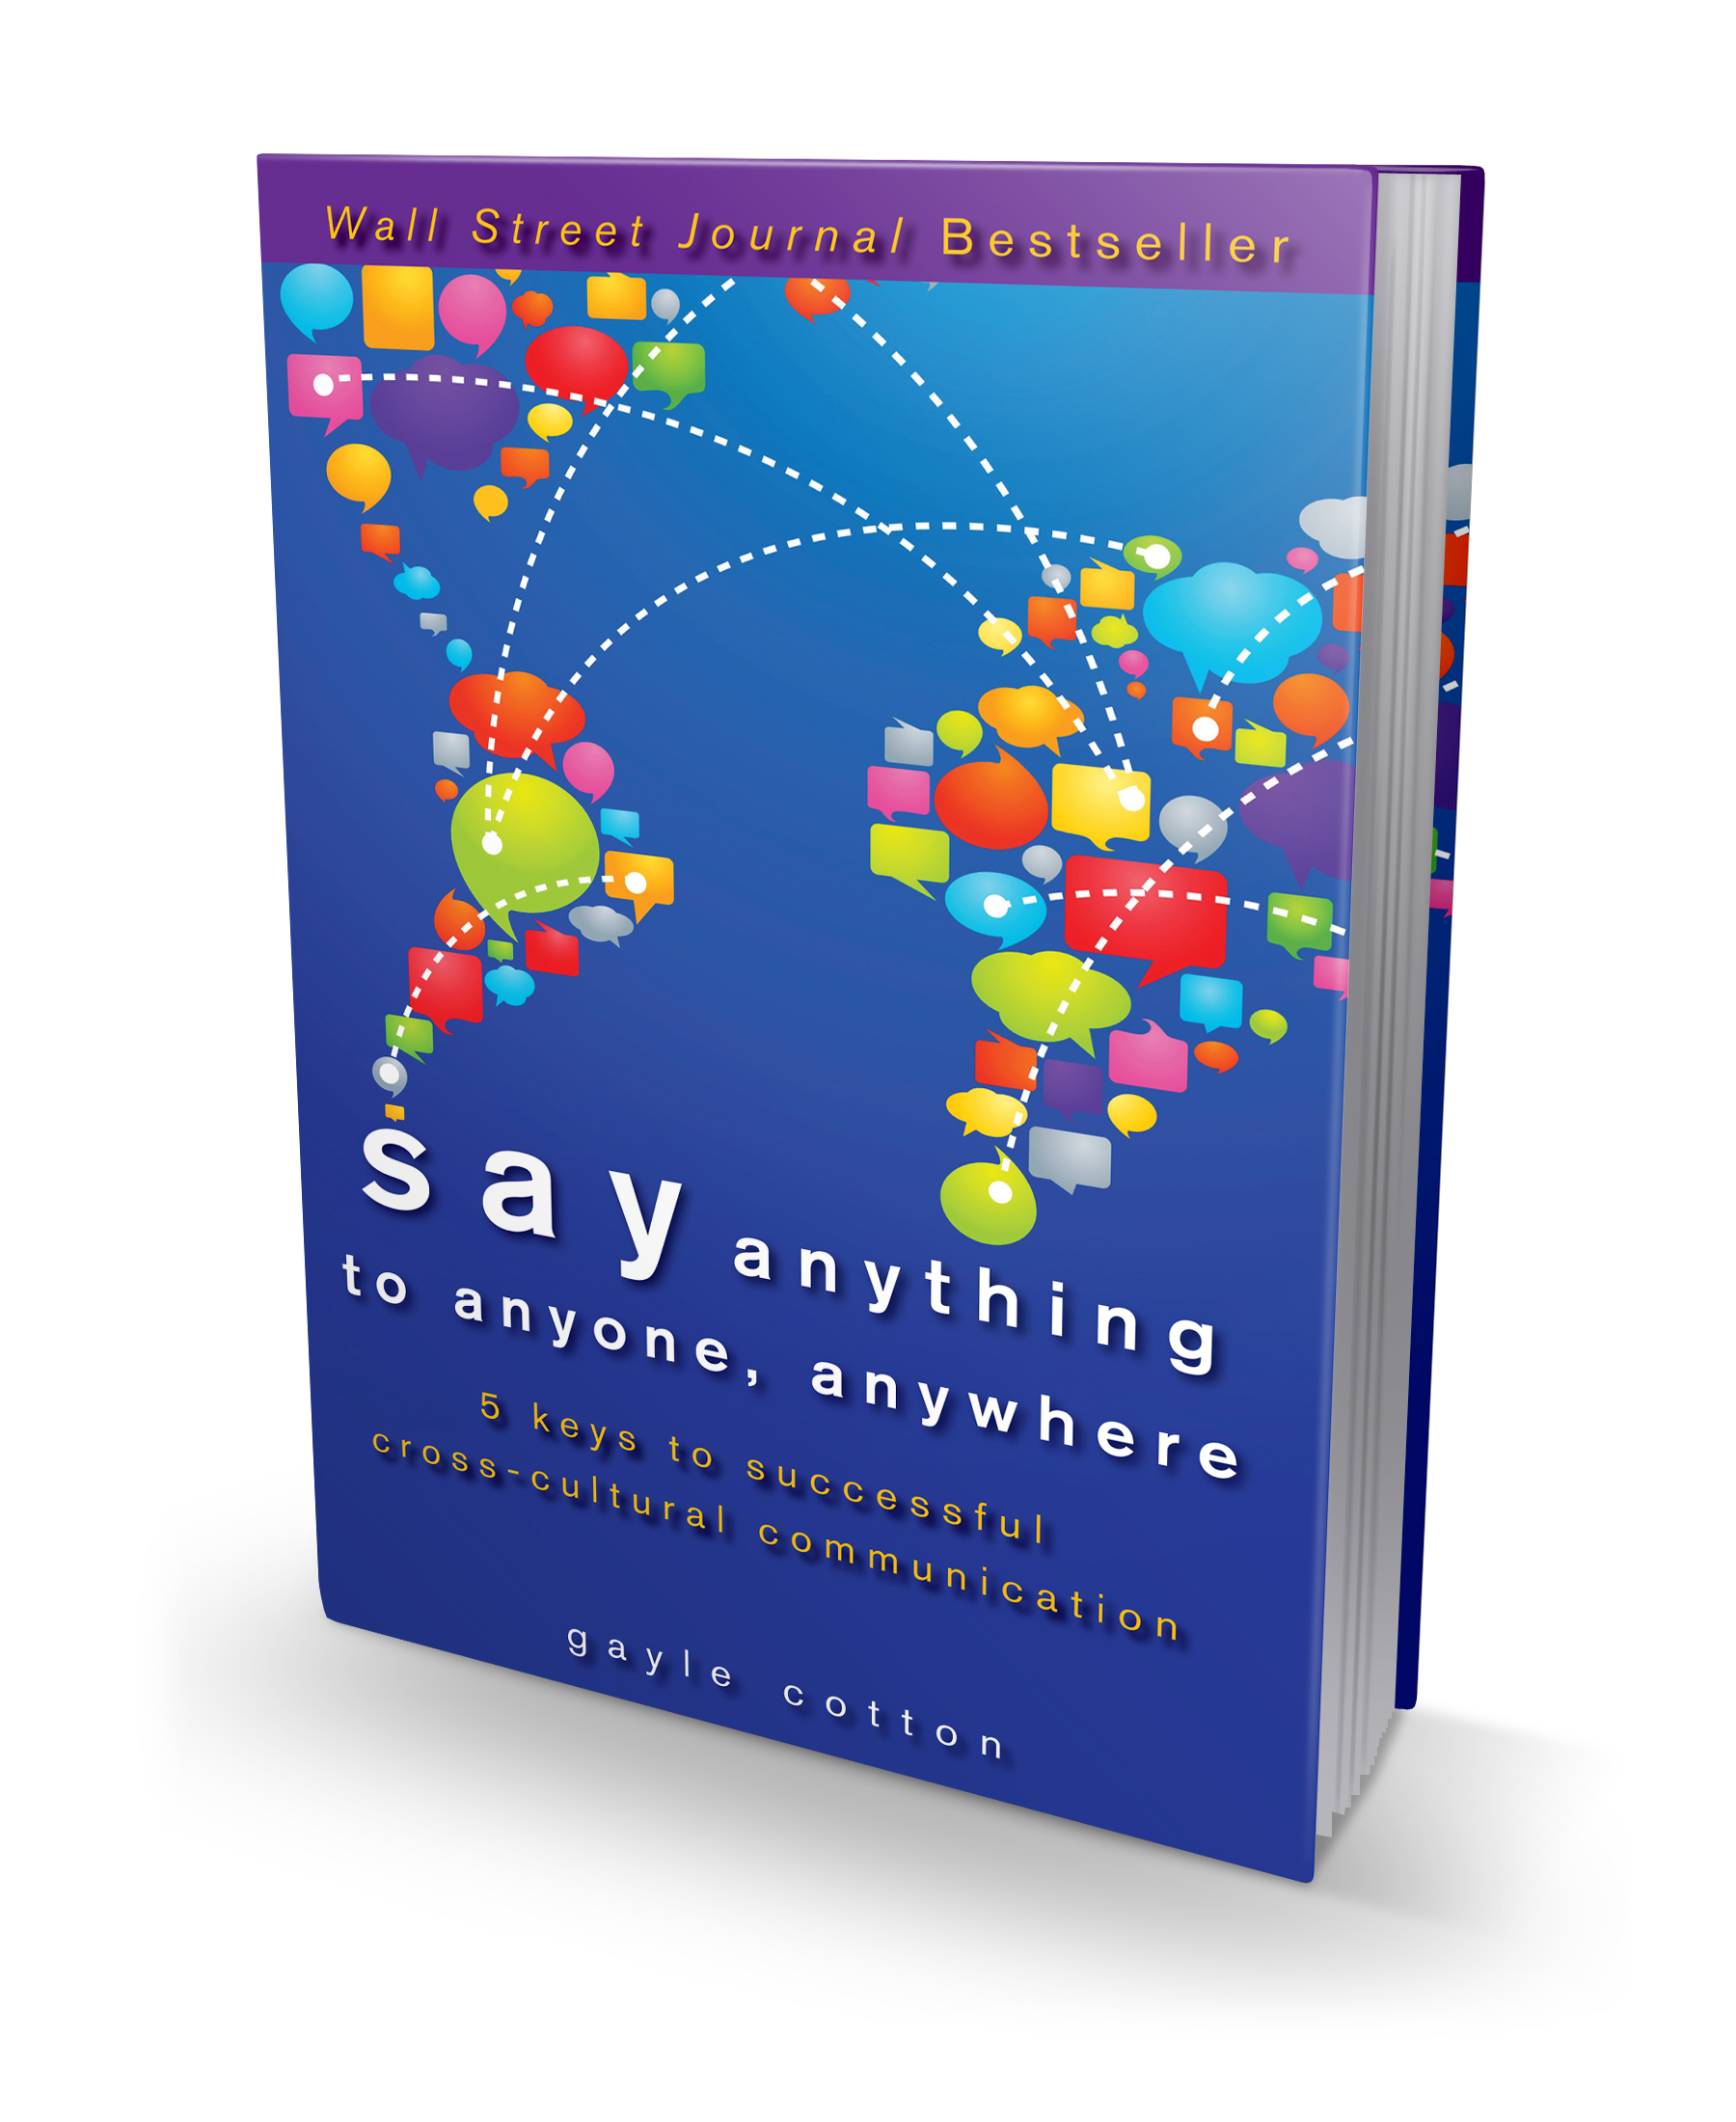 Bestselling Book: SAY Anything to Anyone...